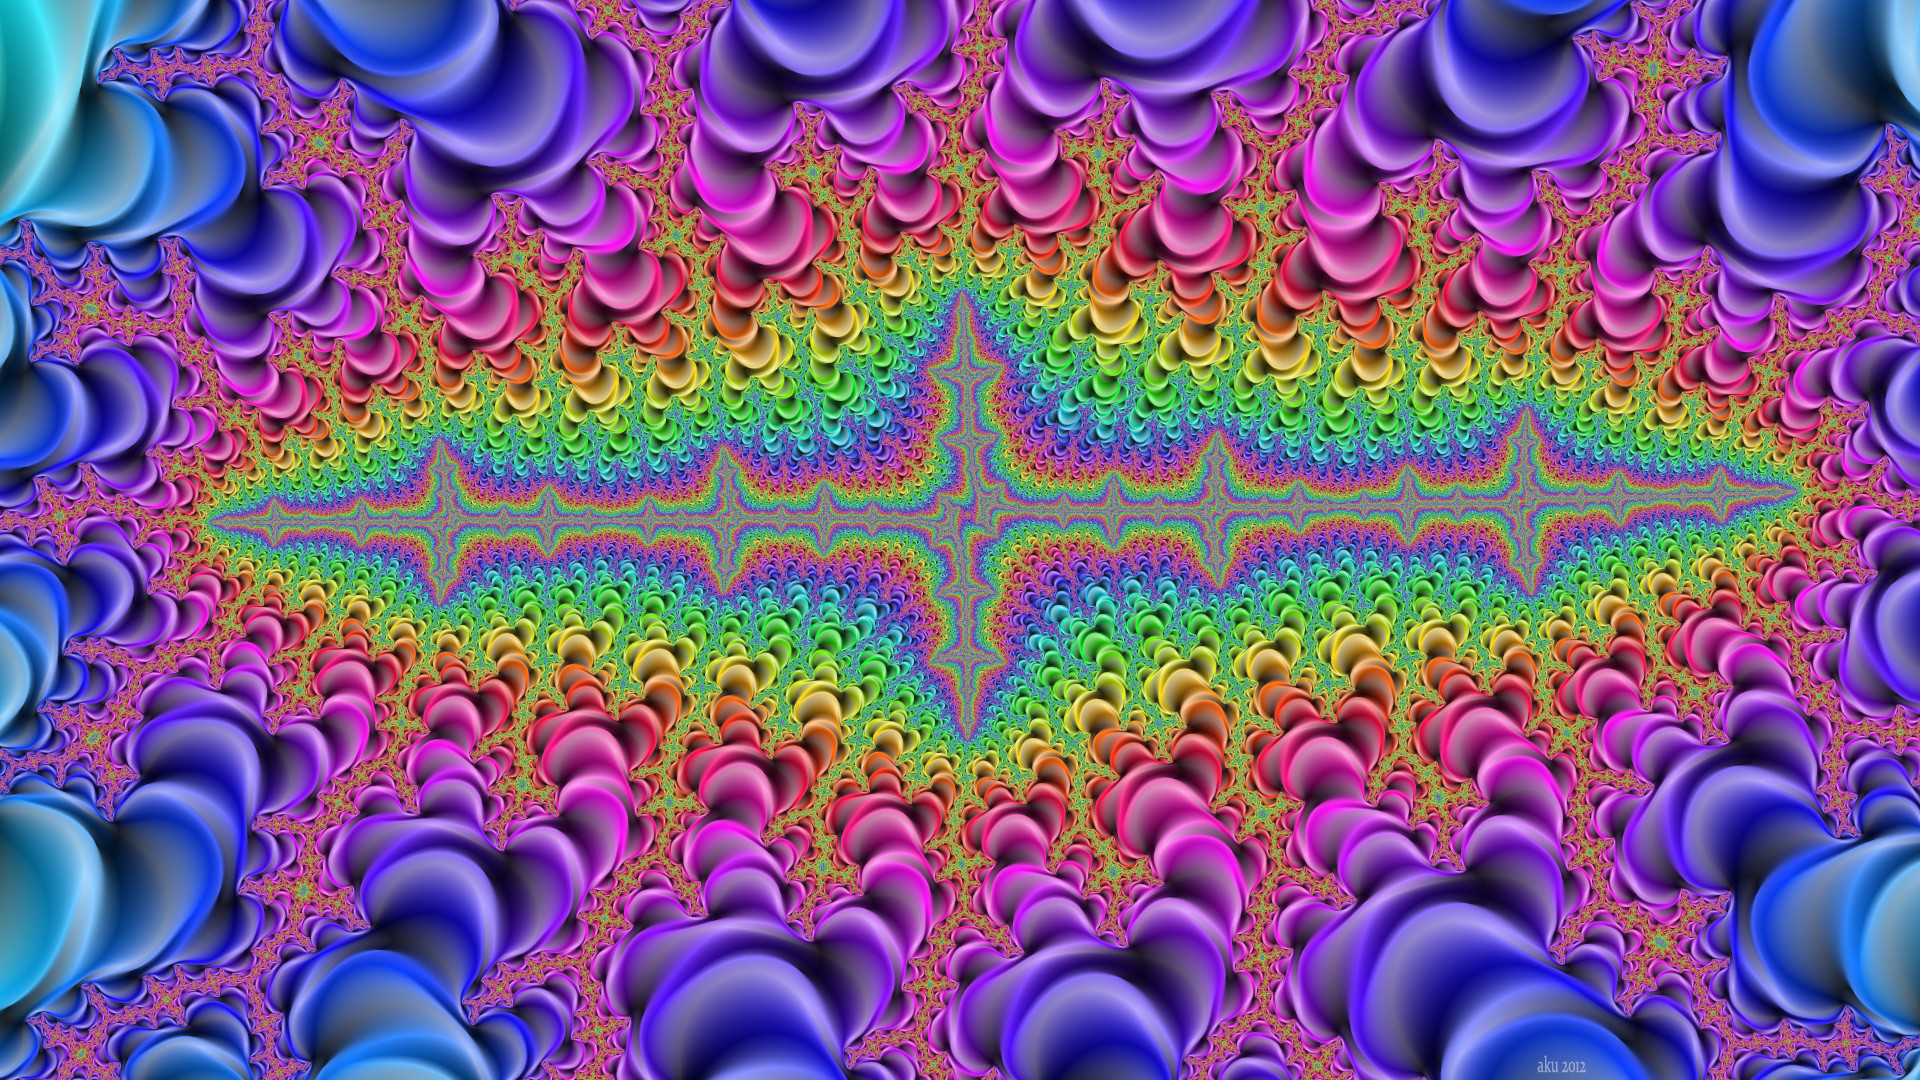 1920x1080 Psychedelic Infinity  | Top reddit wallpapers | Pinterest |  Psychedelic and Infinity